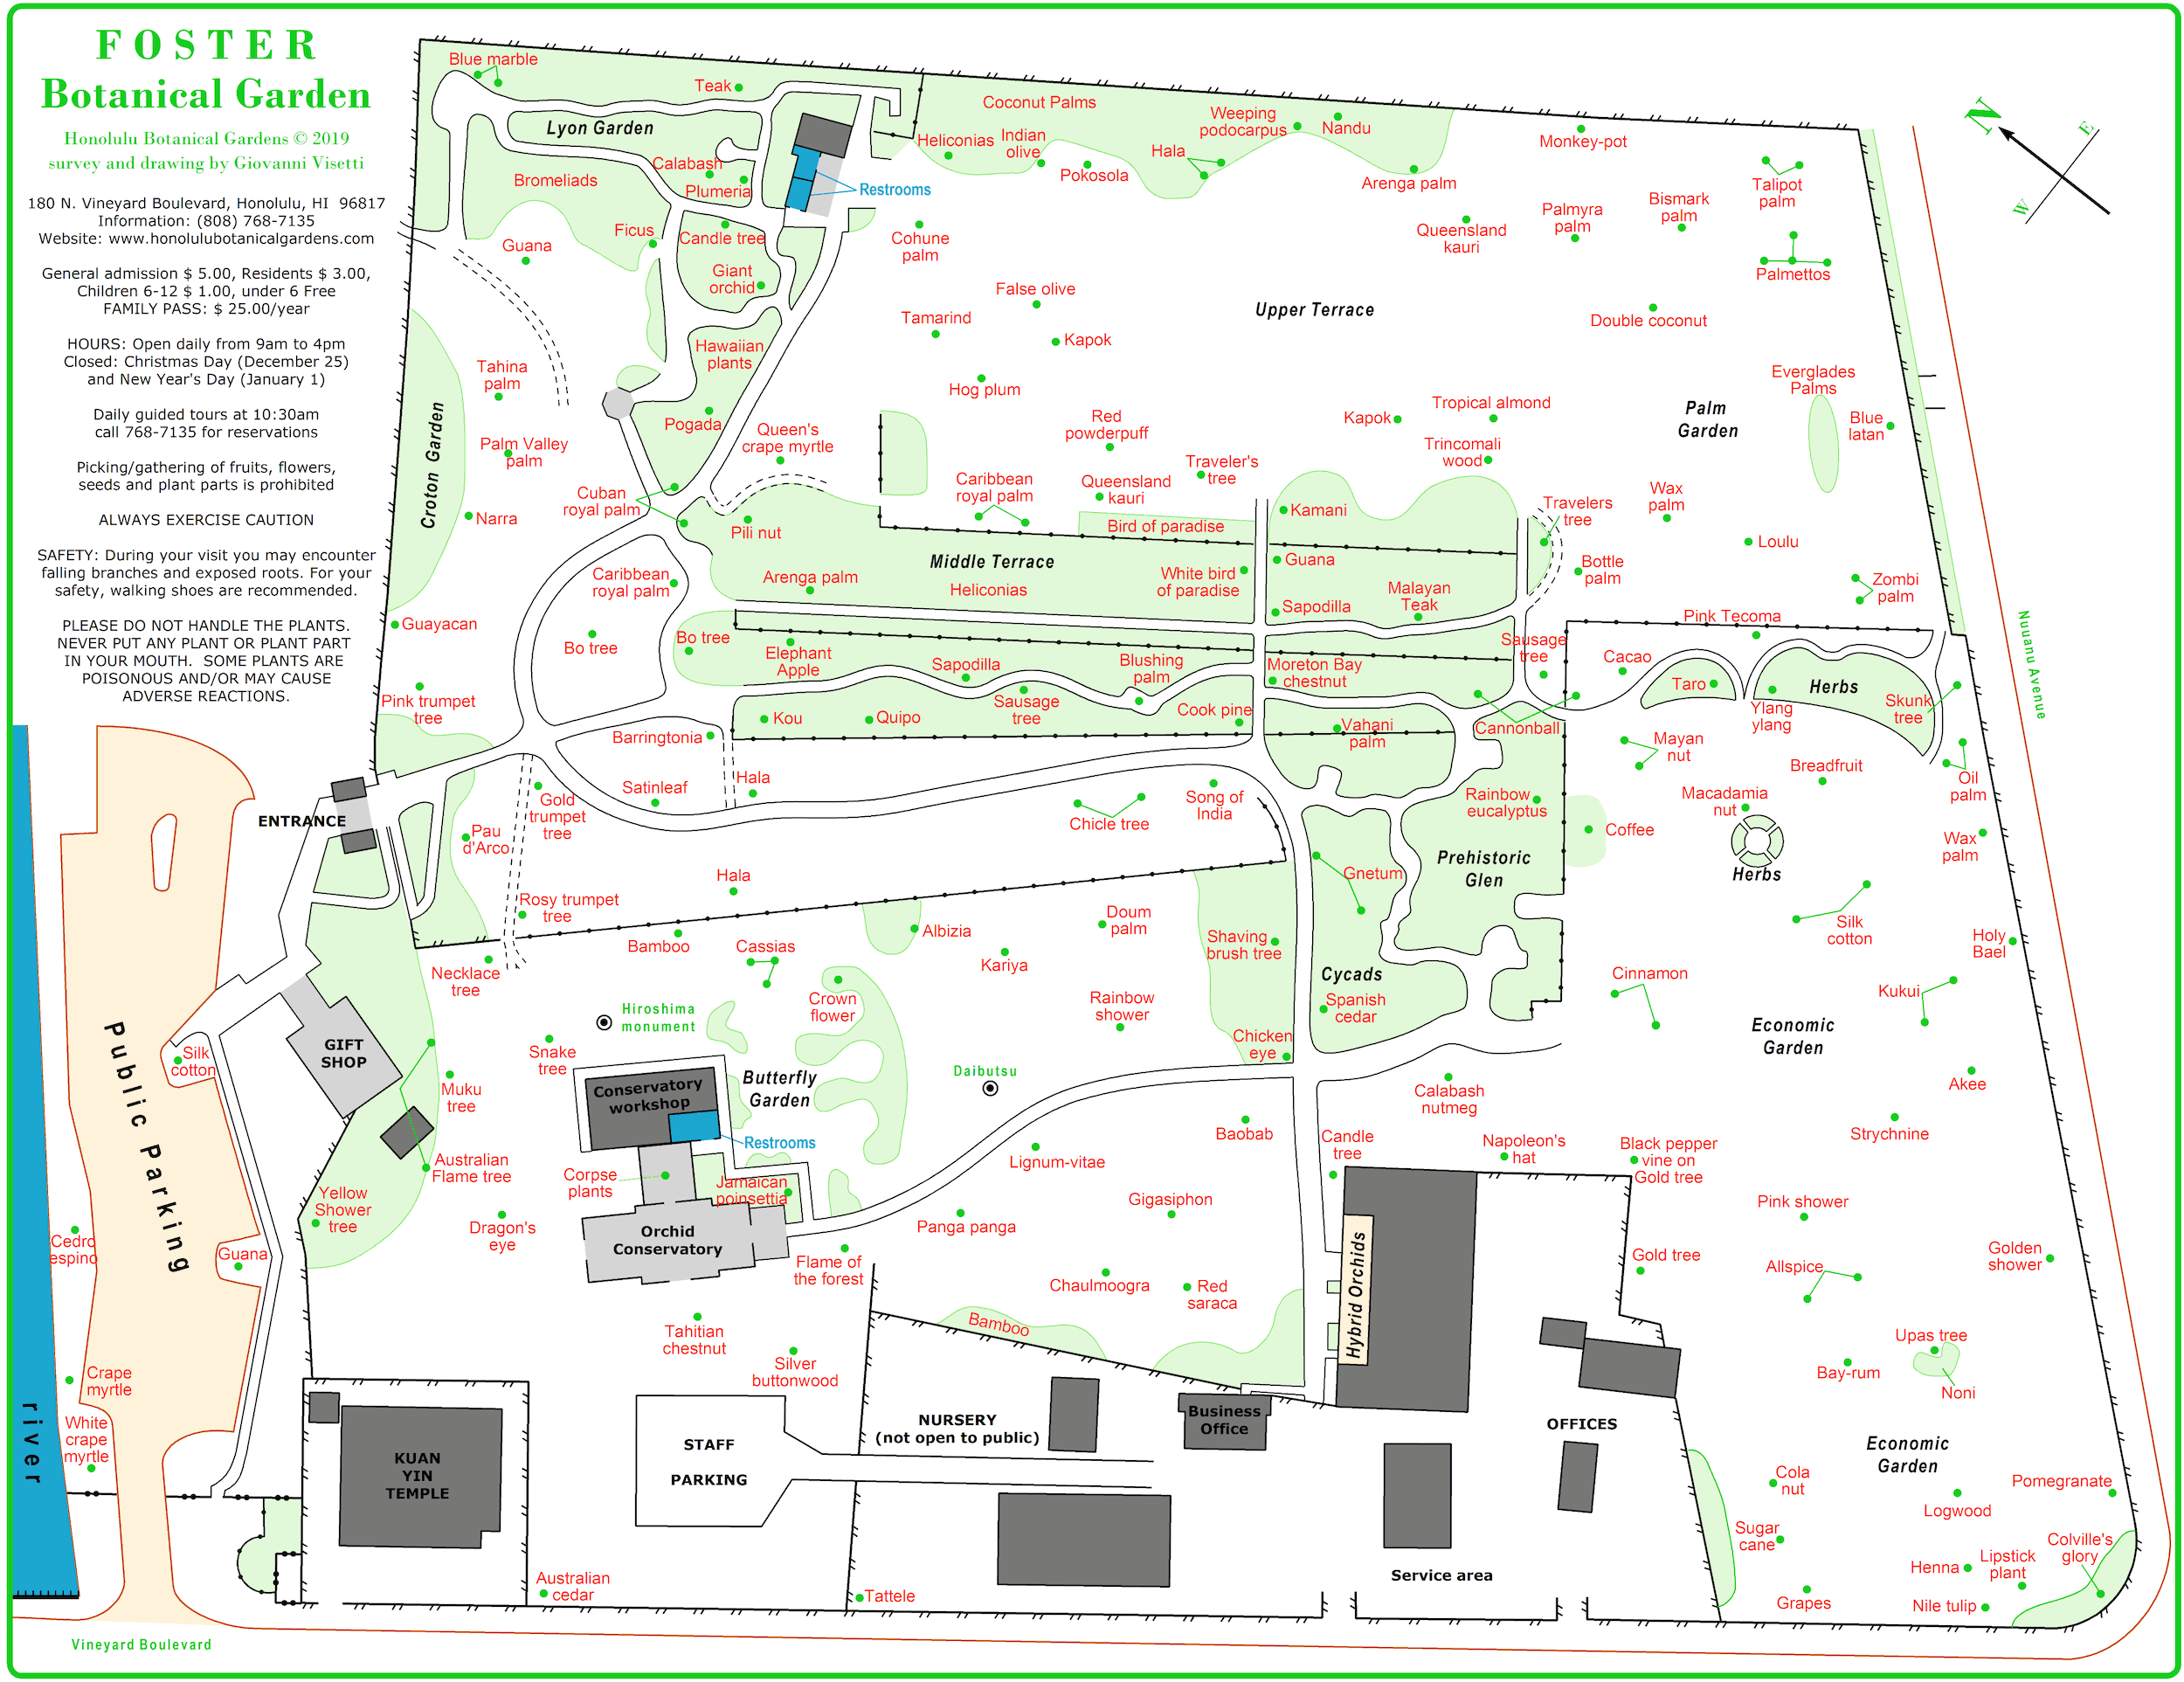 Map of Foster Gardens